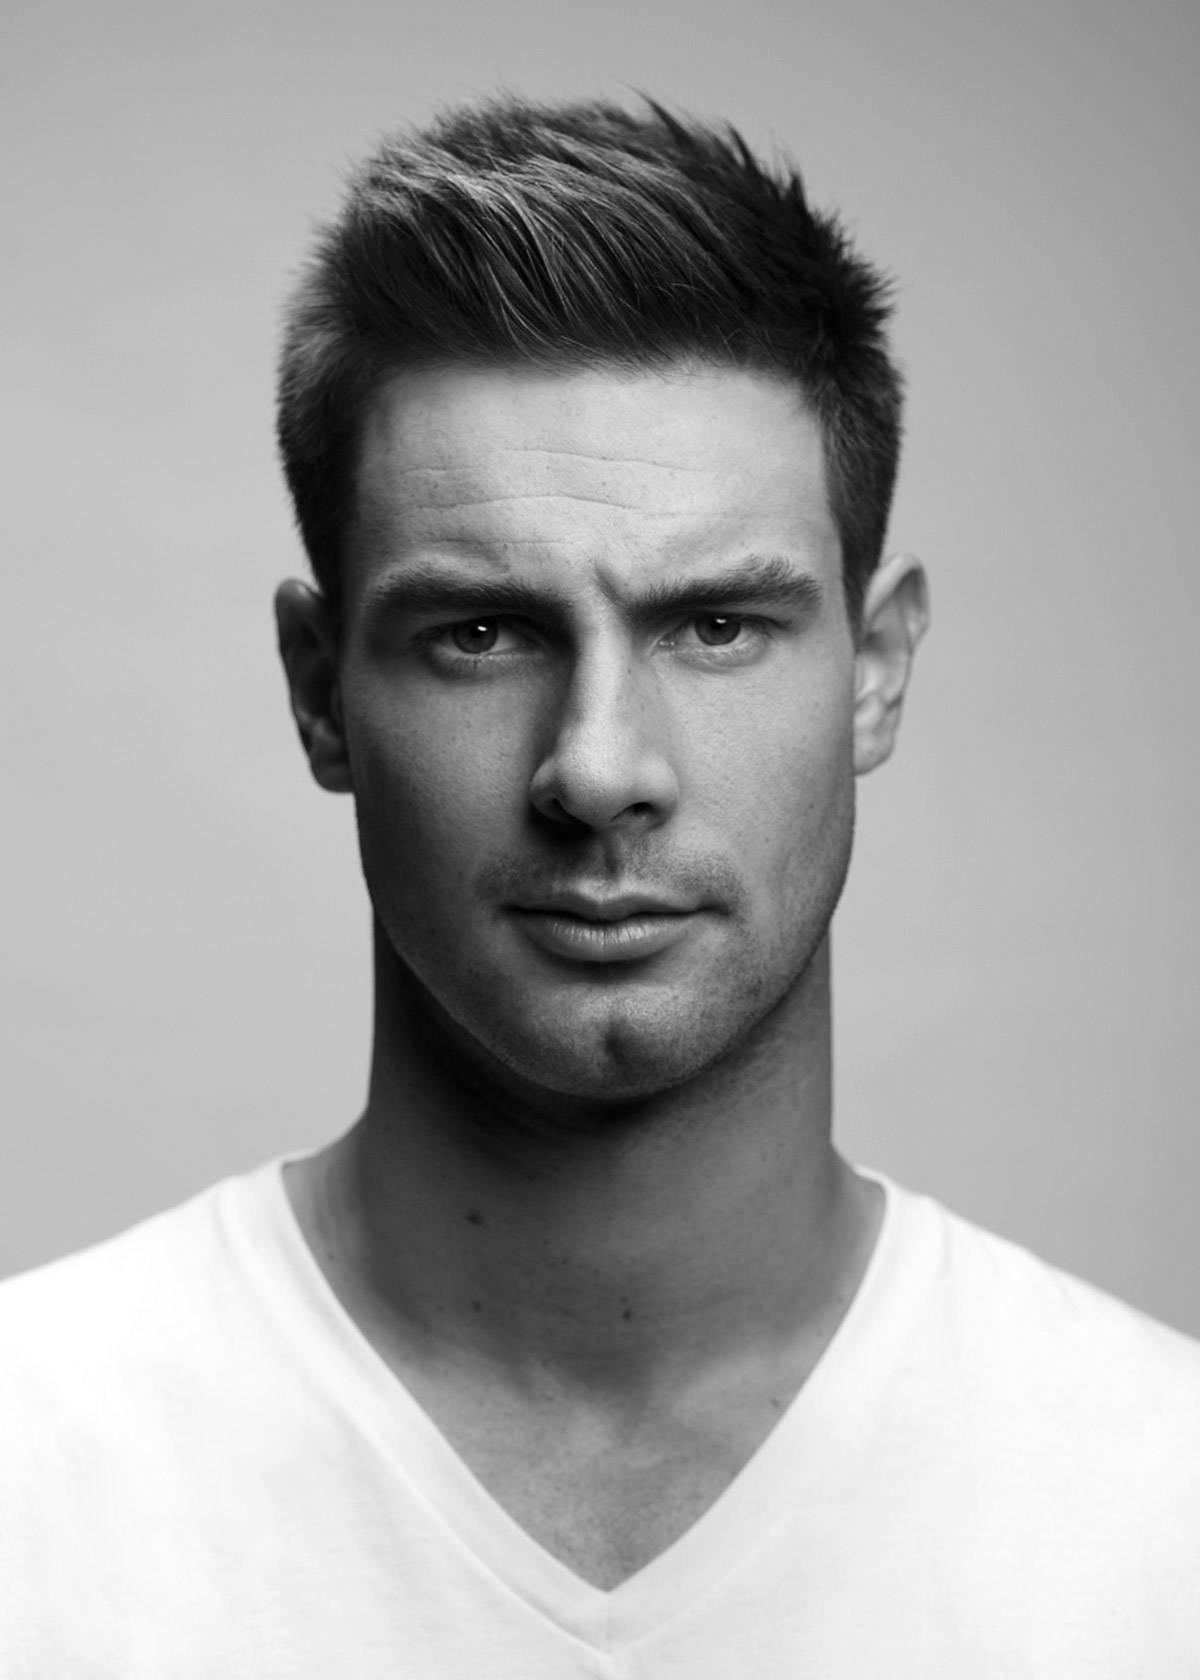 50 Easy & Stylish Short Hairstyles For Men [2021 Edition]